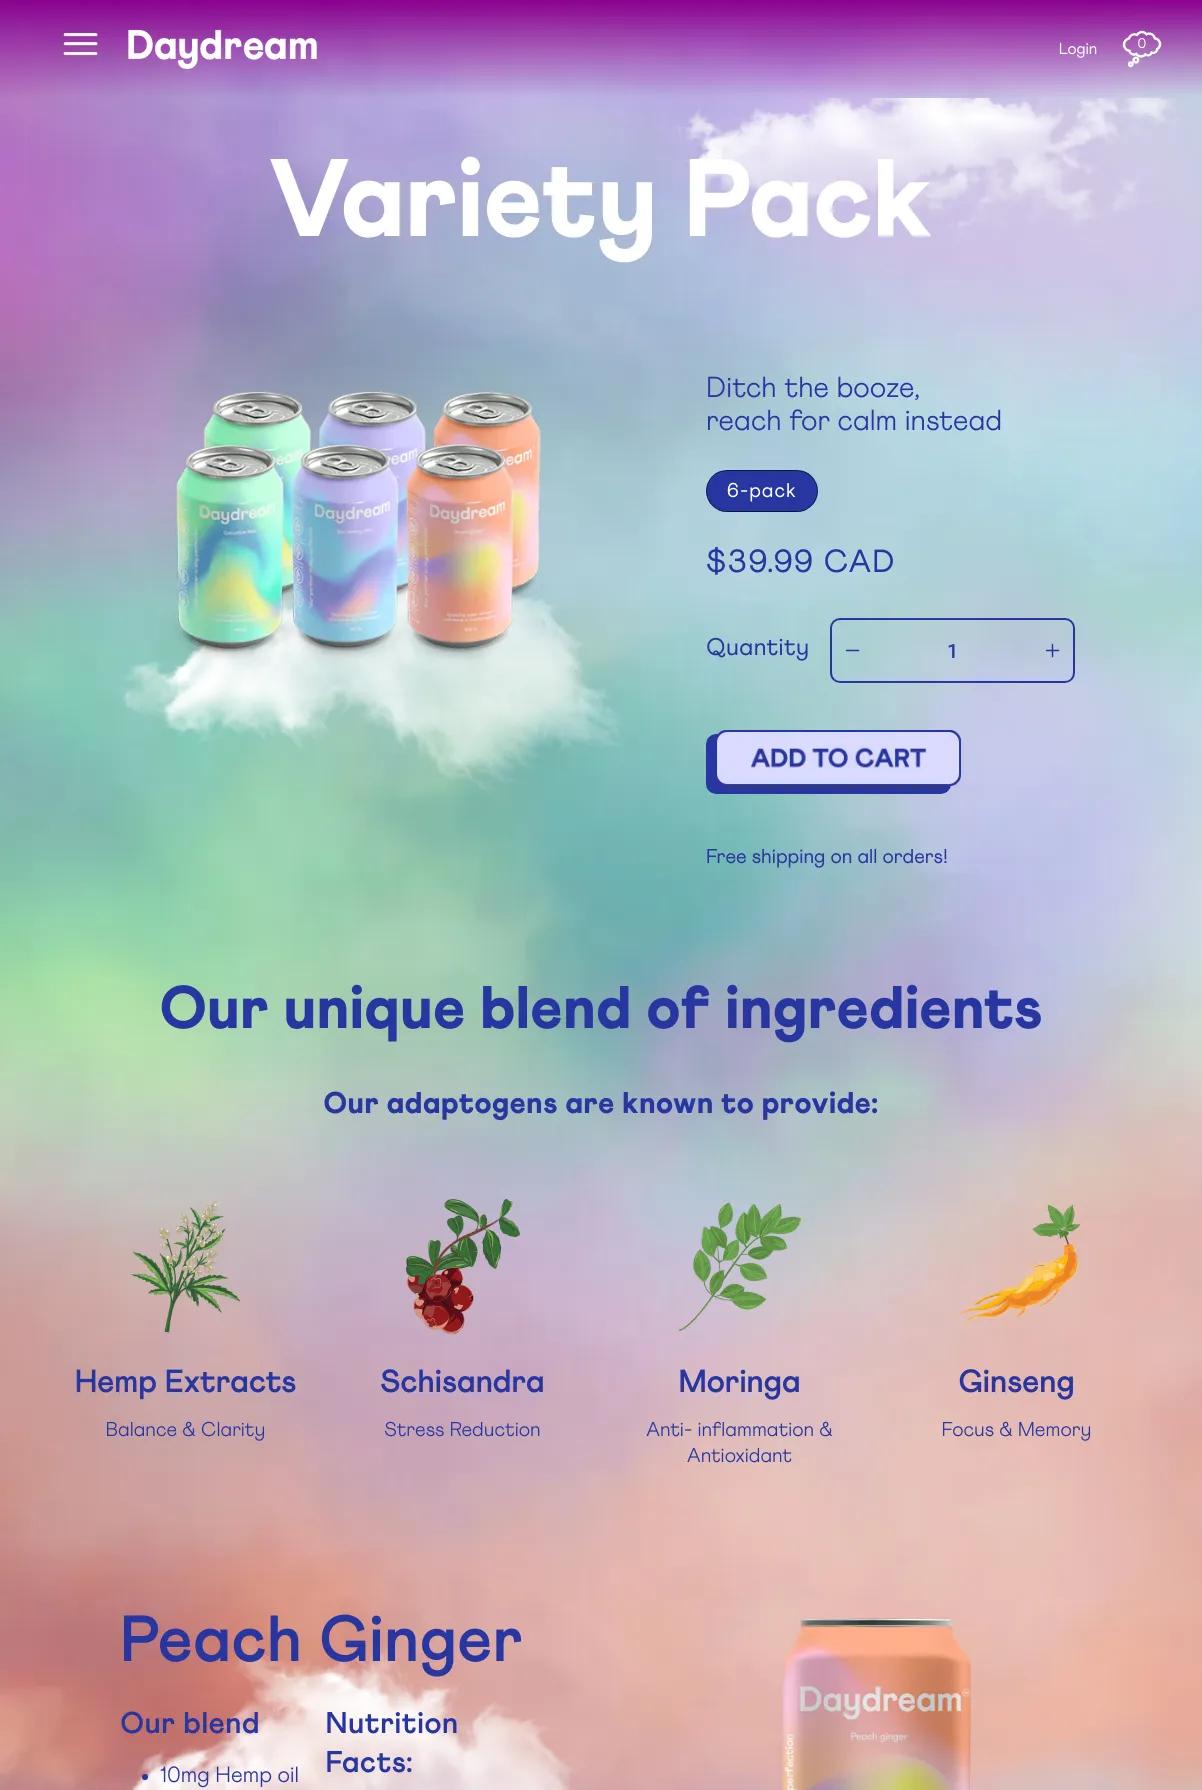 Screenshot 2 of Daydream Drinks (Example Shopify Food and Beverage Website)